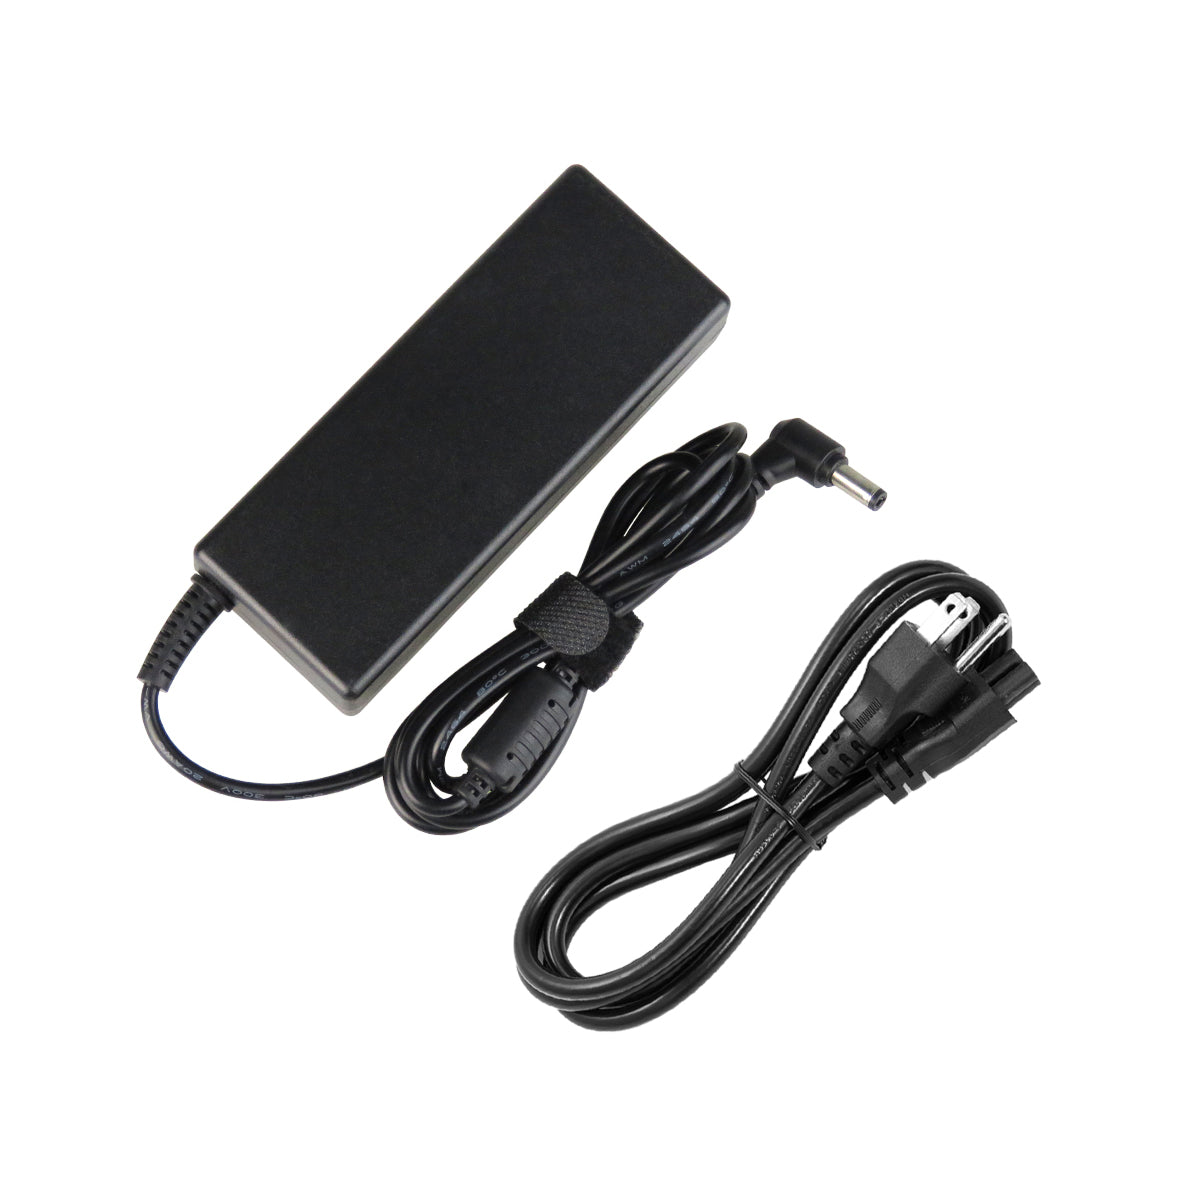 AC Adapter Charger for ASUS X88 Series Notebook.